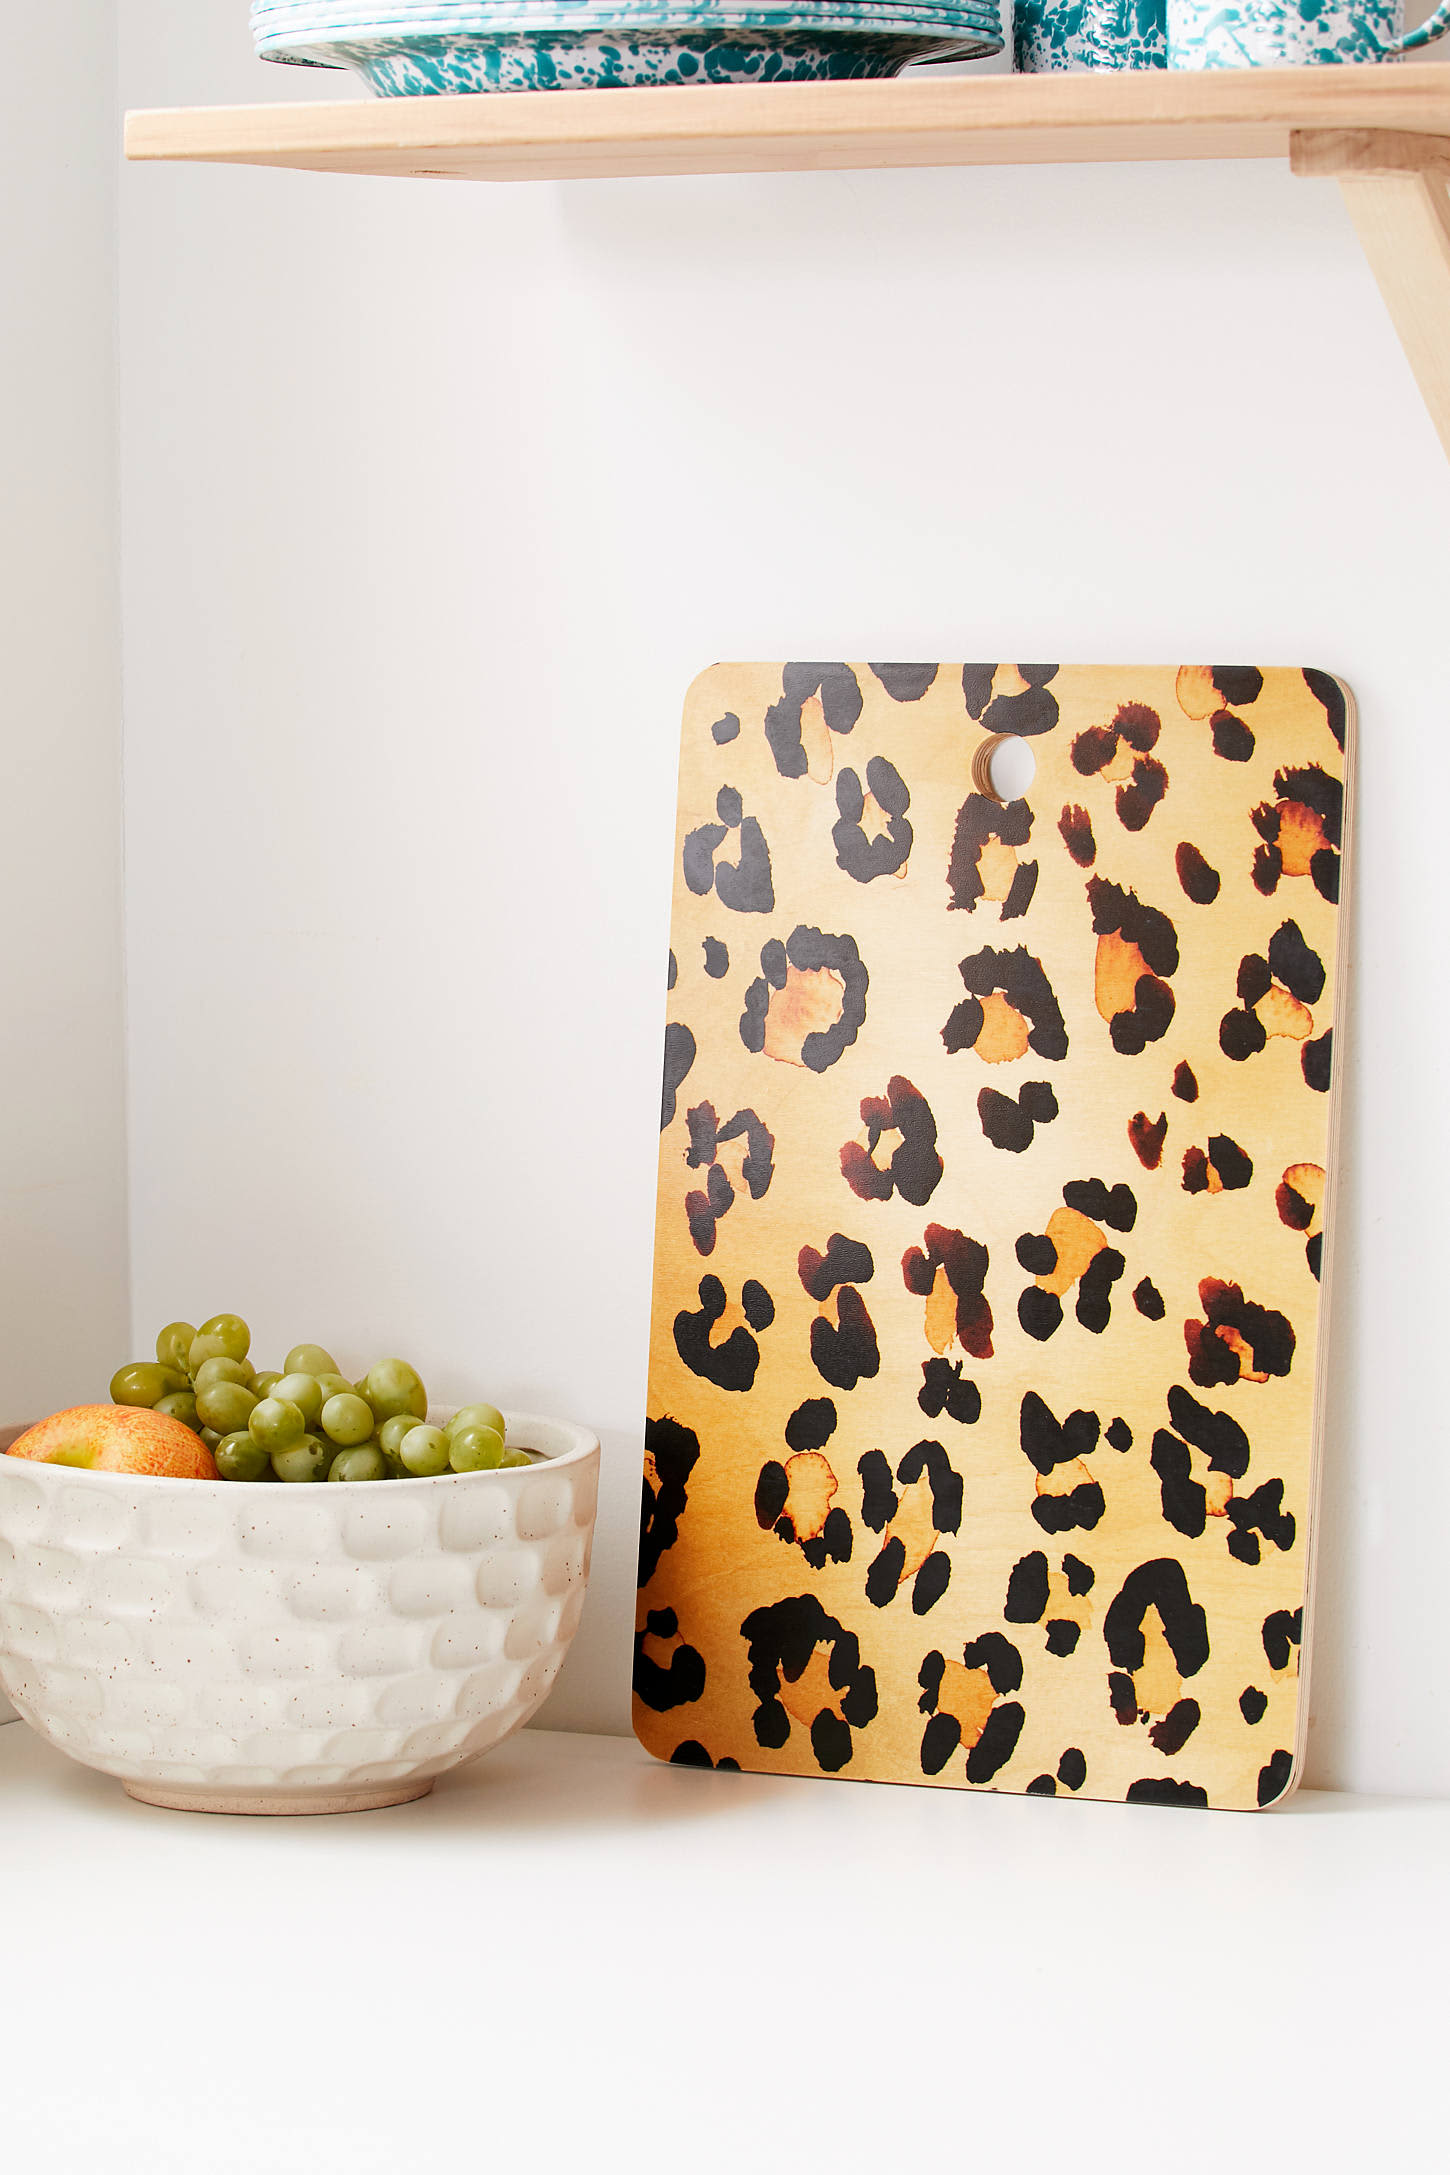 https://cdn.apartmenttherapy.info/image/upload/v1567864442/at/amy-sia-leopard-cutting-board.jpg